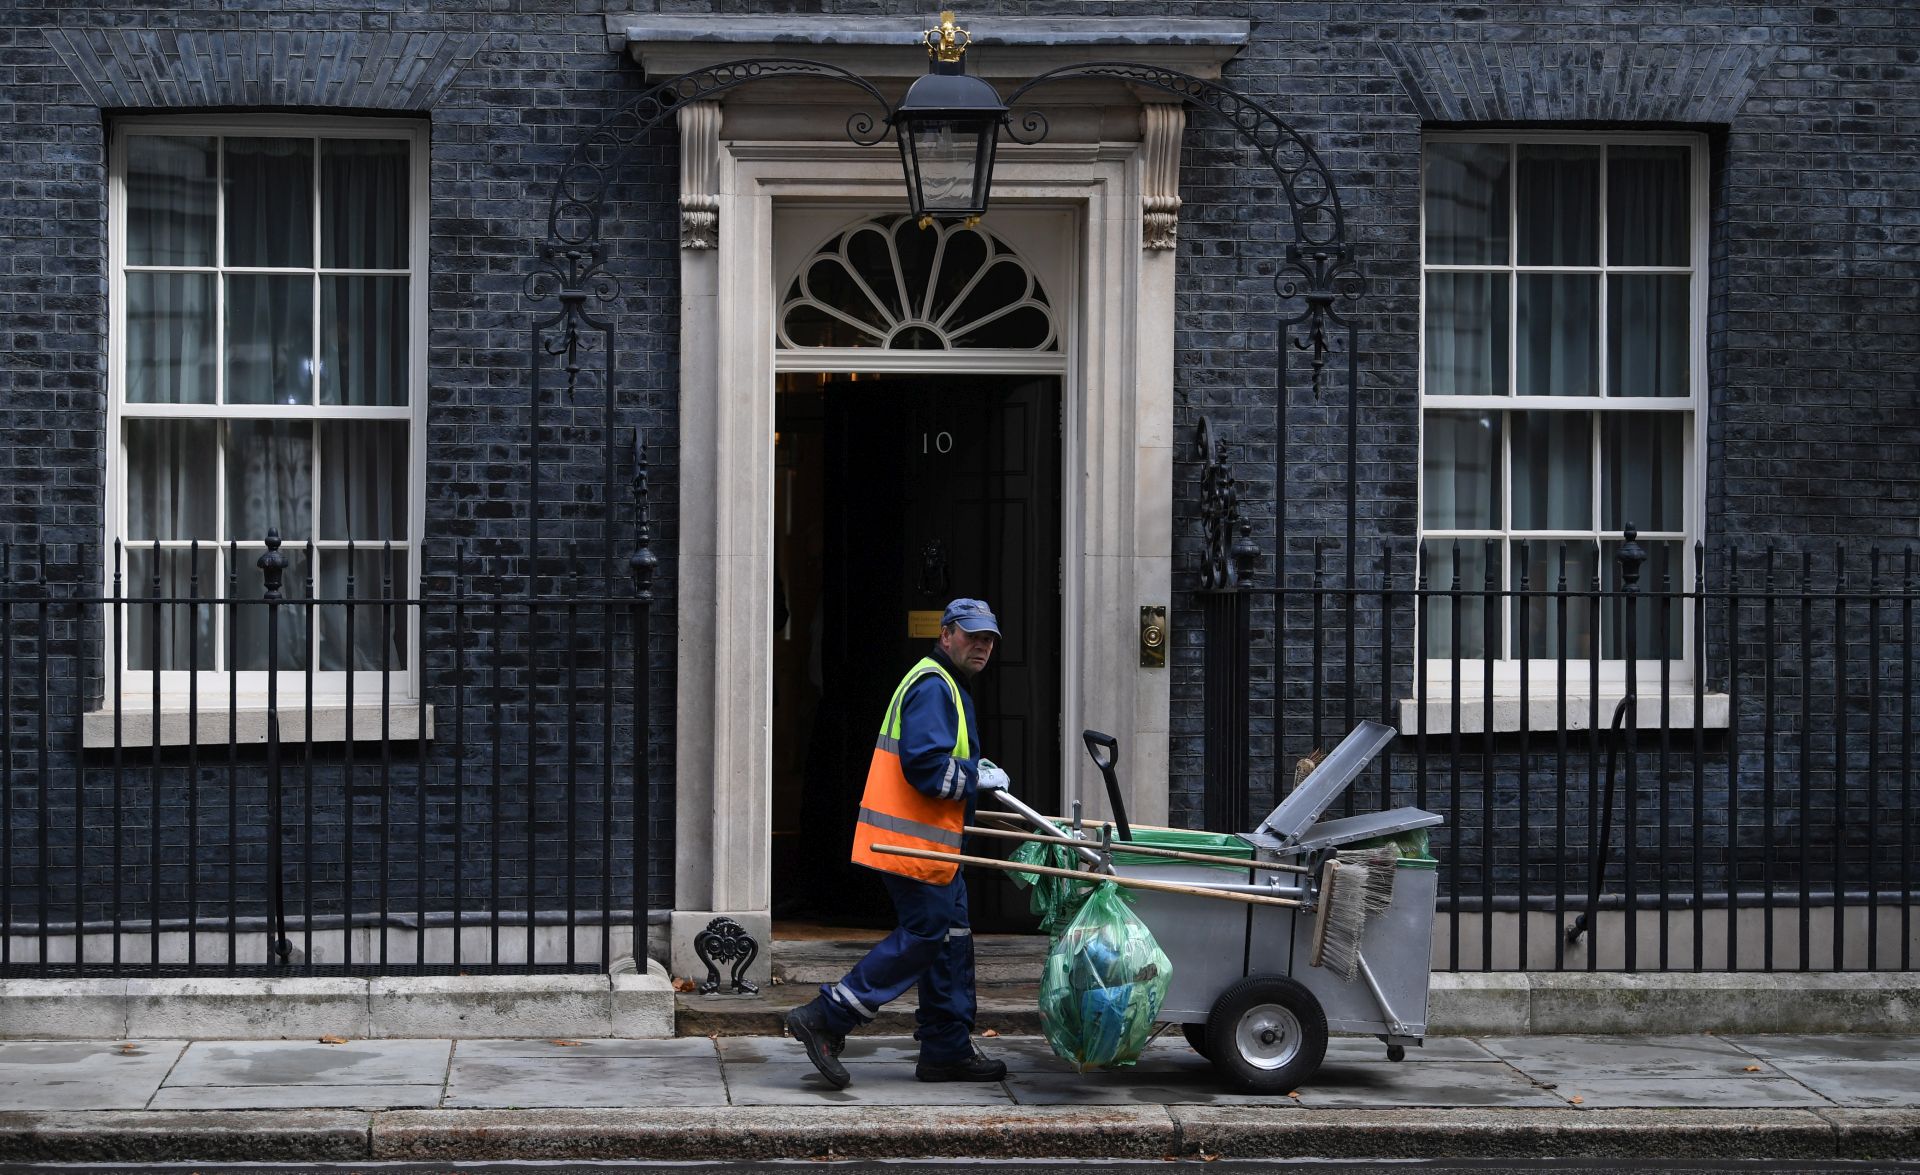 epa07816290 A street cleaner in Downing Street, central London, Britain, 04 September 2019. Members of Parliament will vote on a bill forcing Britain's Prime Minister Boris Johnson to delay Brexit unless MPs back a new deal or vote for a no-deal exit. The Prime Minister will table a motion to call for a general election if that bill passes  EPA/NEIL HALL